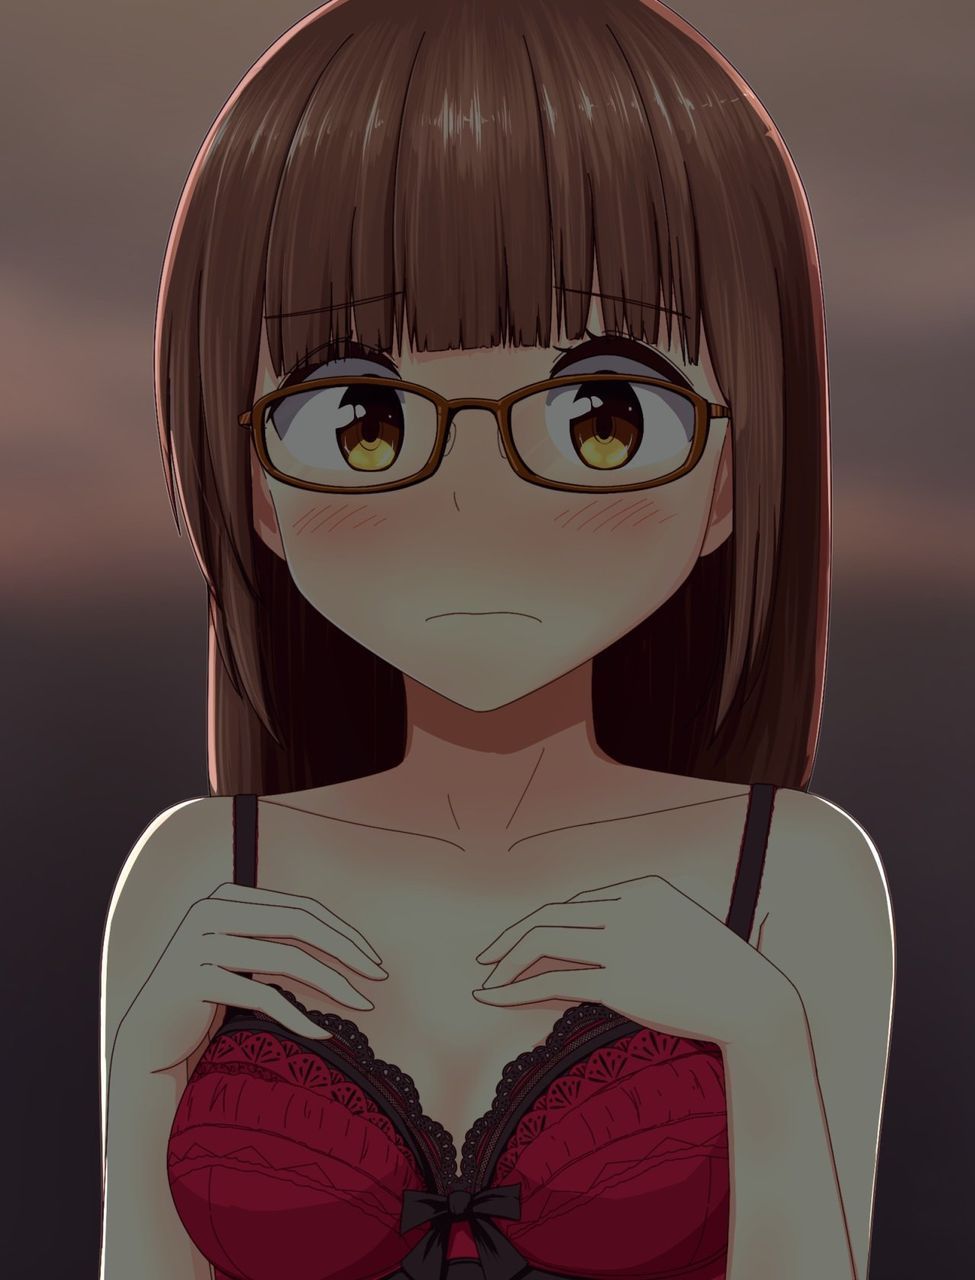 There is a theory that all glasses girls other than the person inside are erotic cute, right? 12